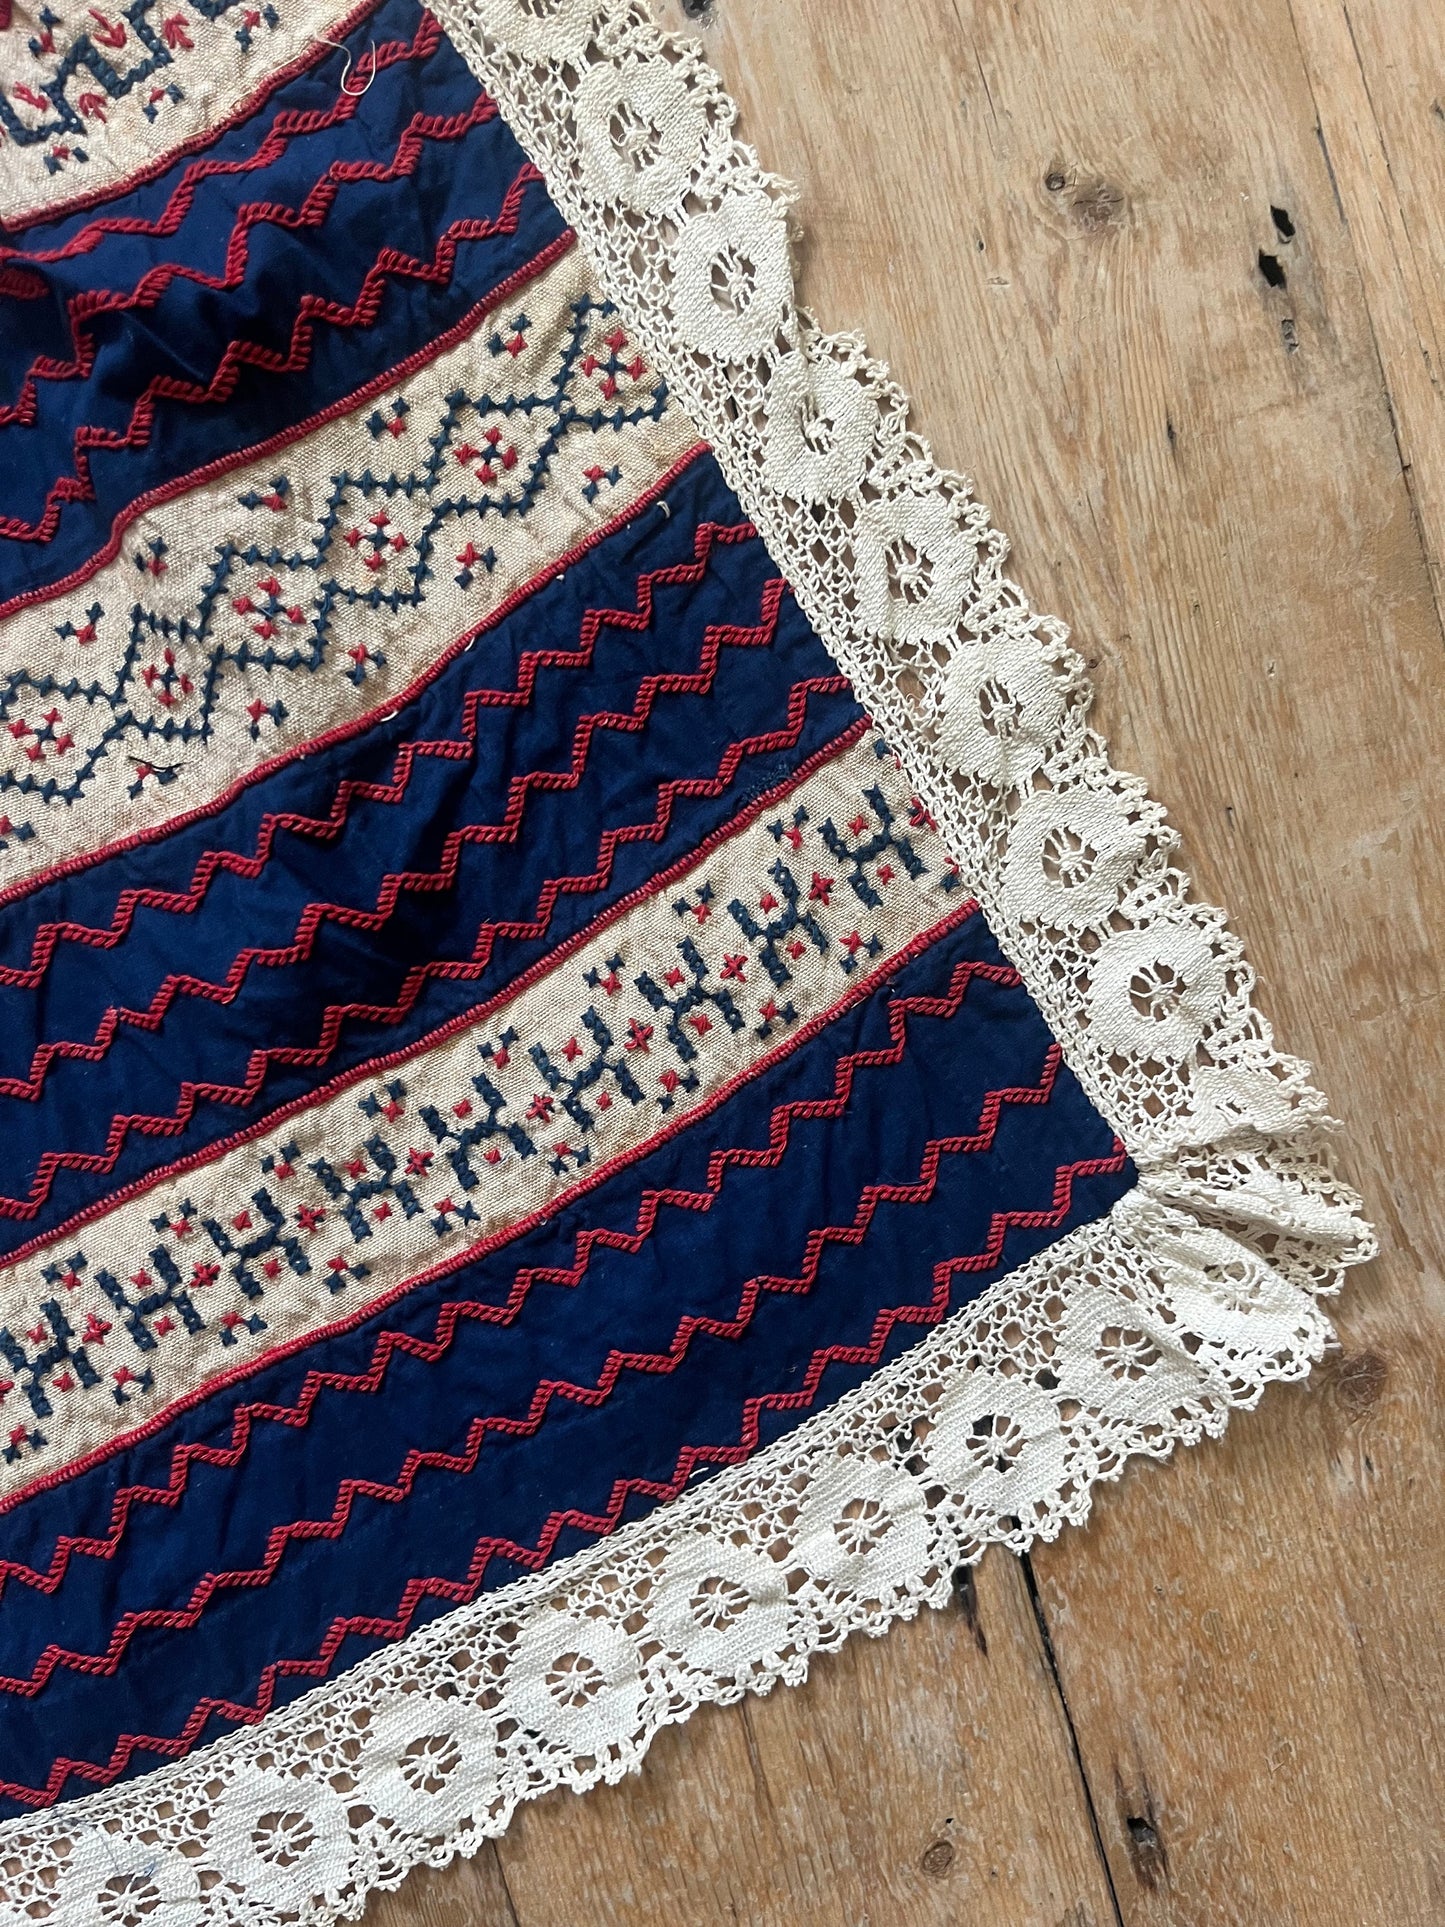 1930s French Apron Embroidered Red white Blue Crochet Lace